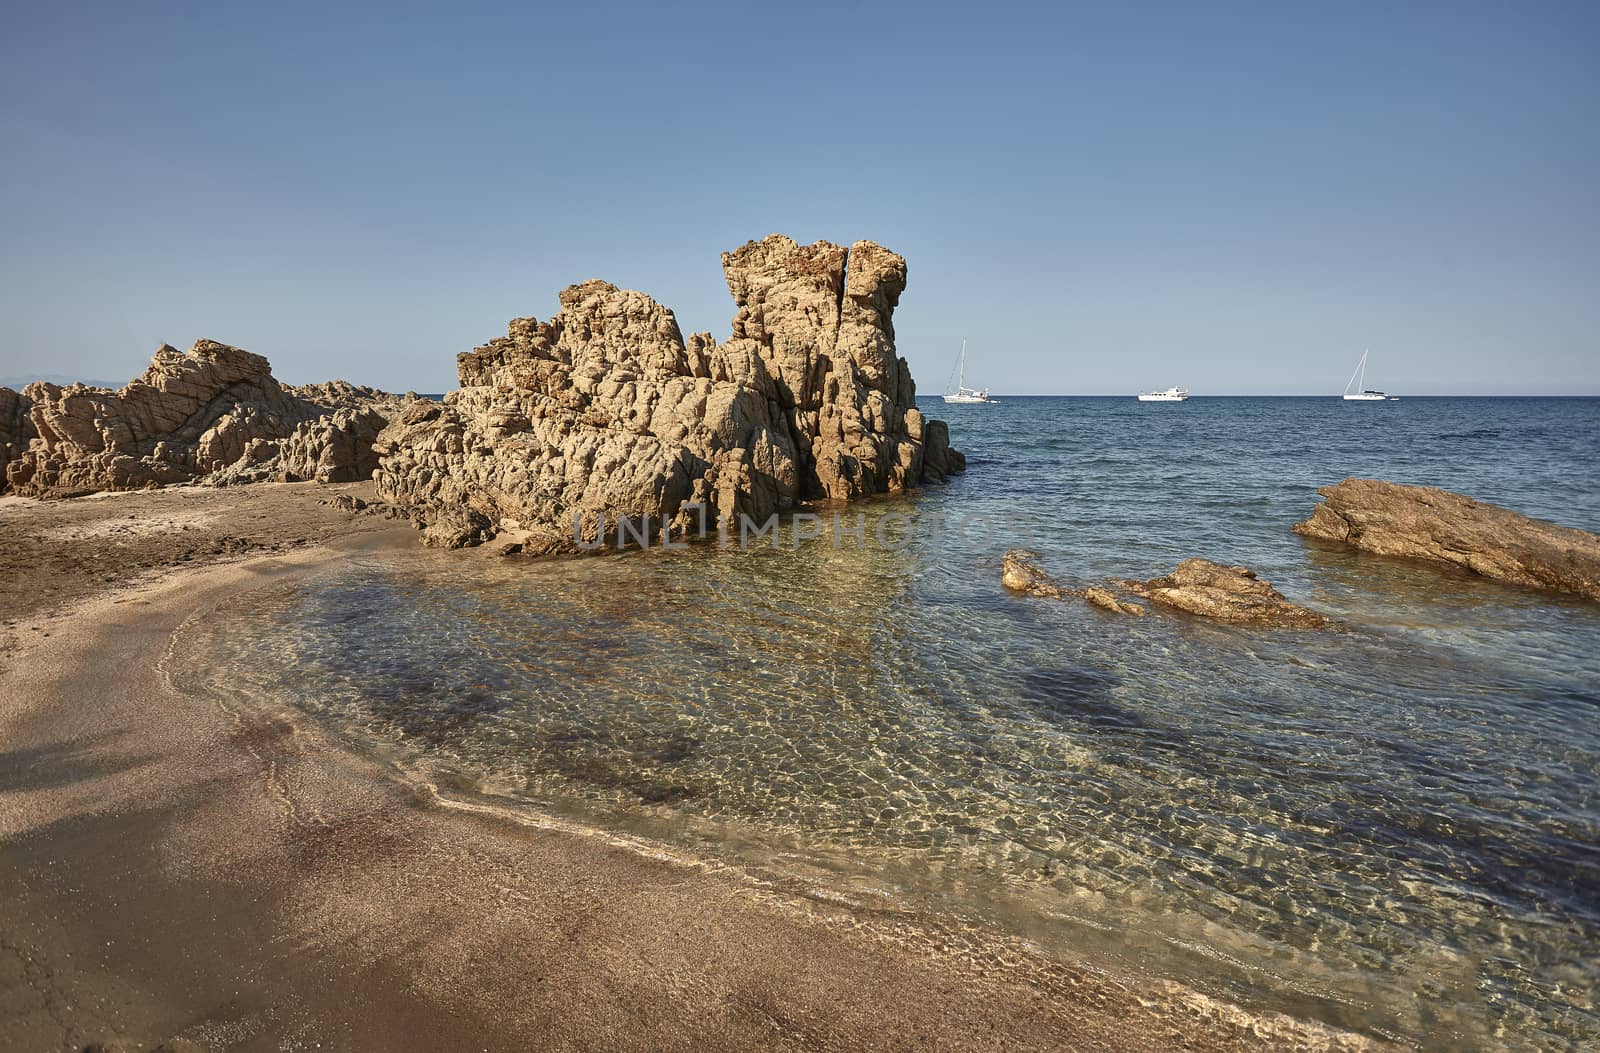 South rocky sardinia beach with waves of transparent sea coming ashore to merge with golden beach.